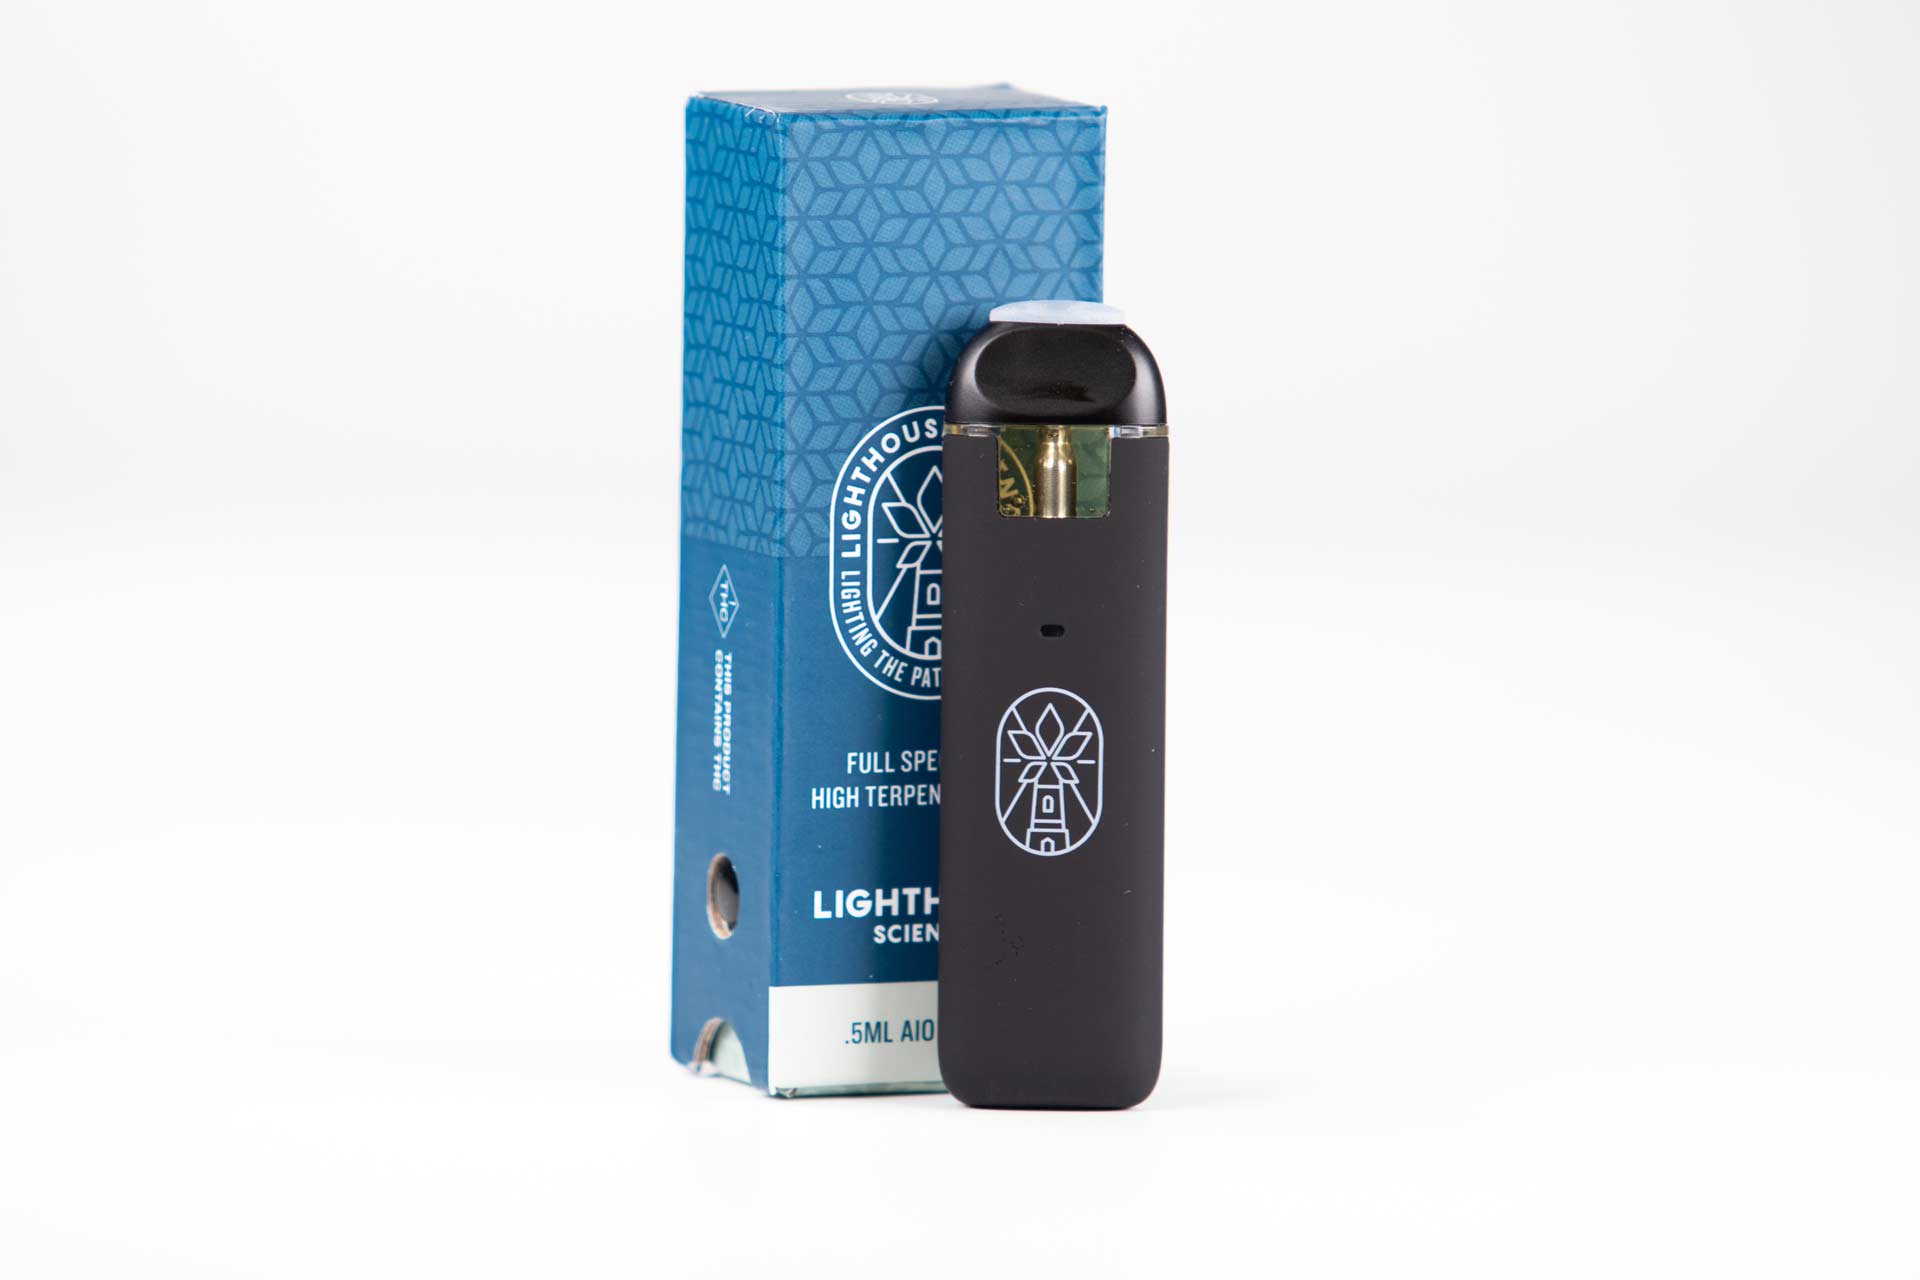 Lighthouse Science's All in One Cannabis Vape